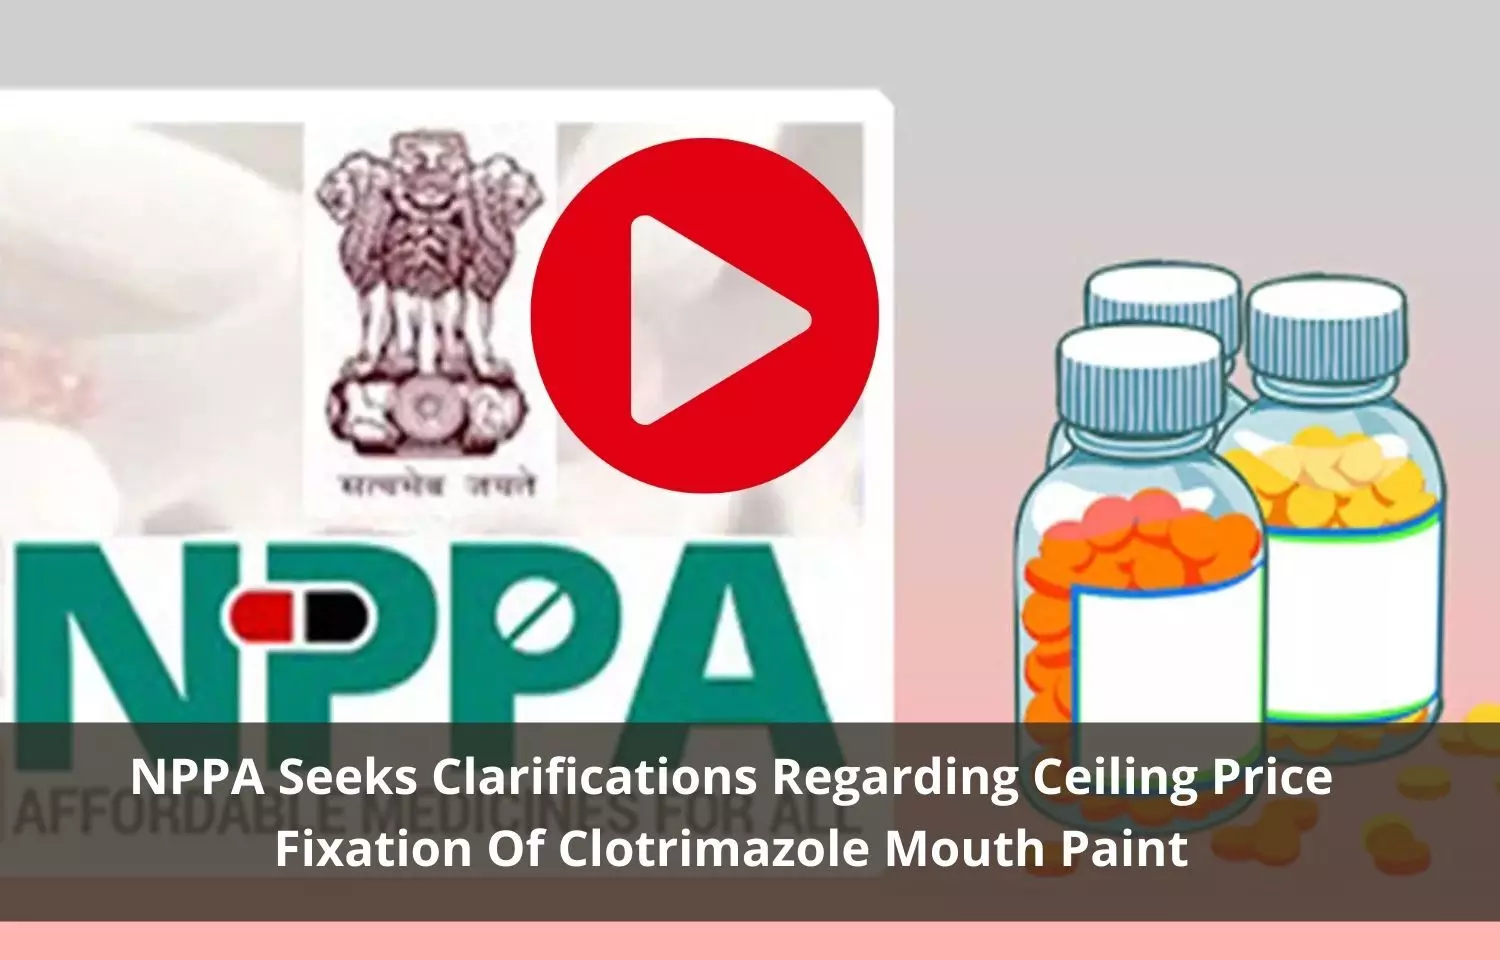 NPPA seeks clarification on license status from Clotrimazole mouth paint manufacturers